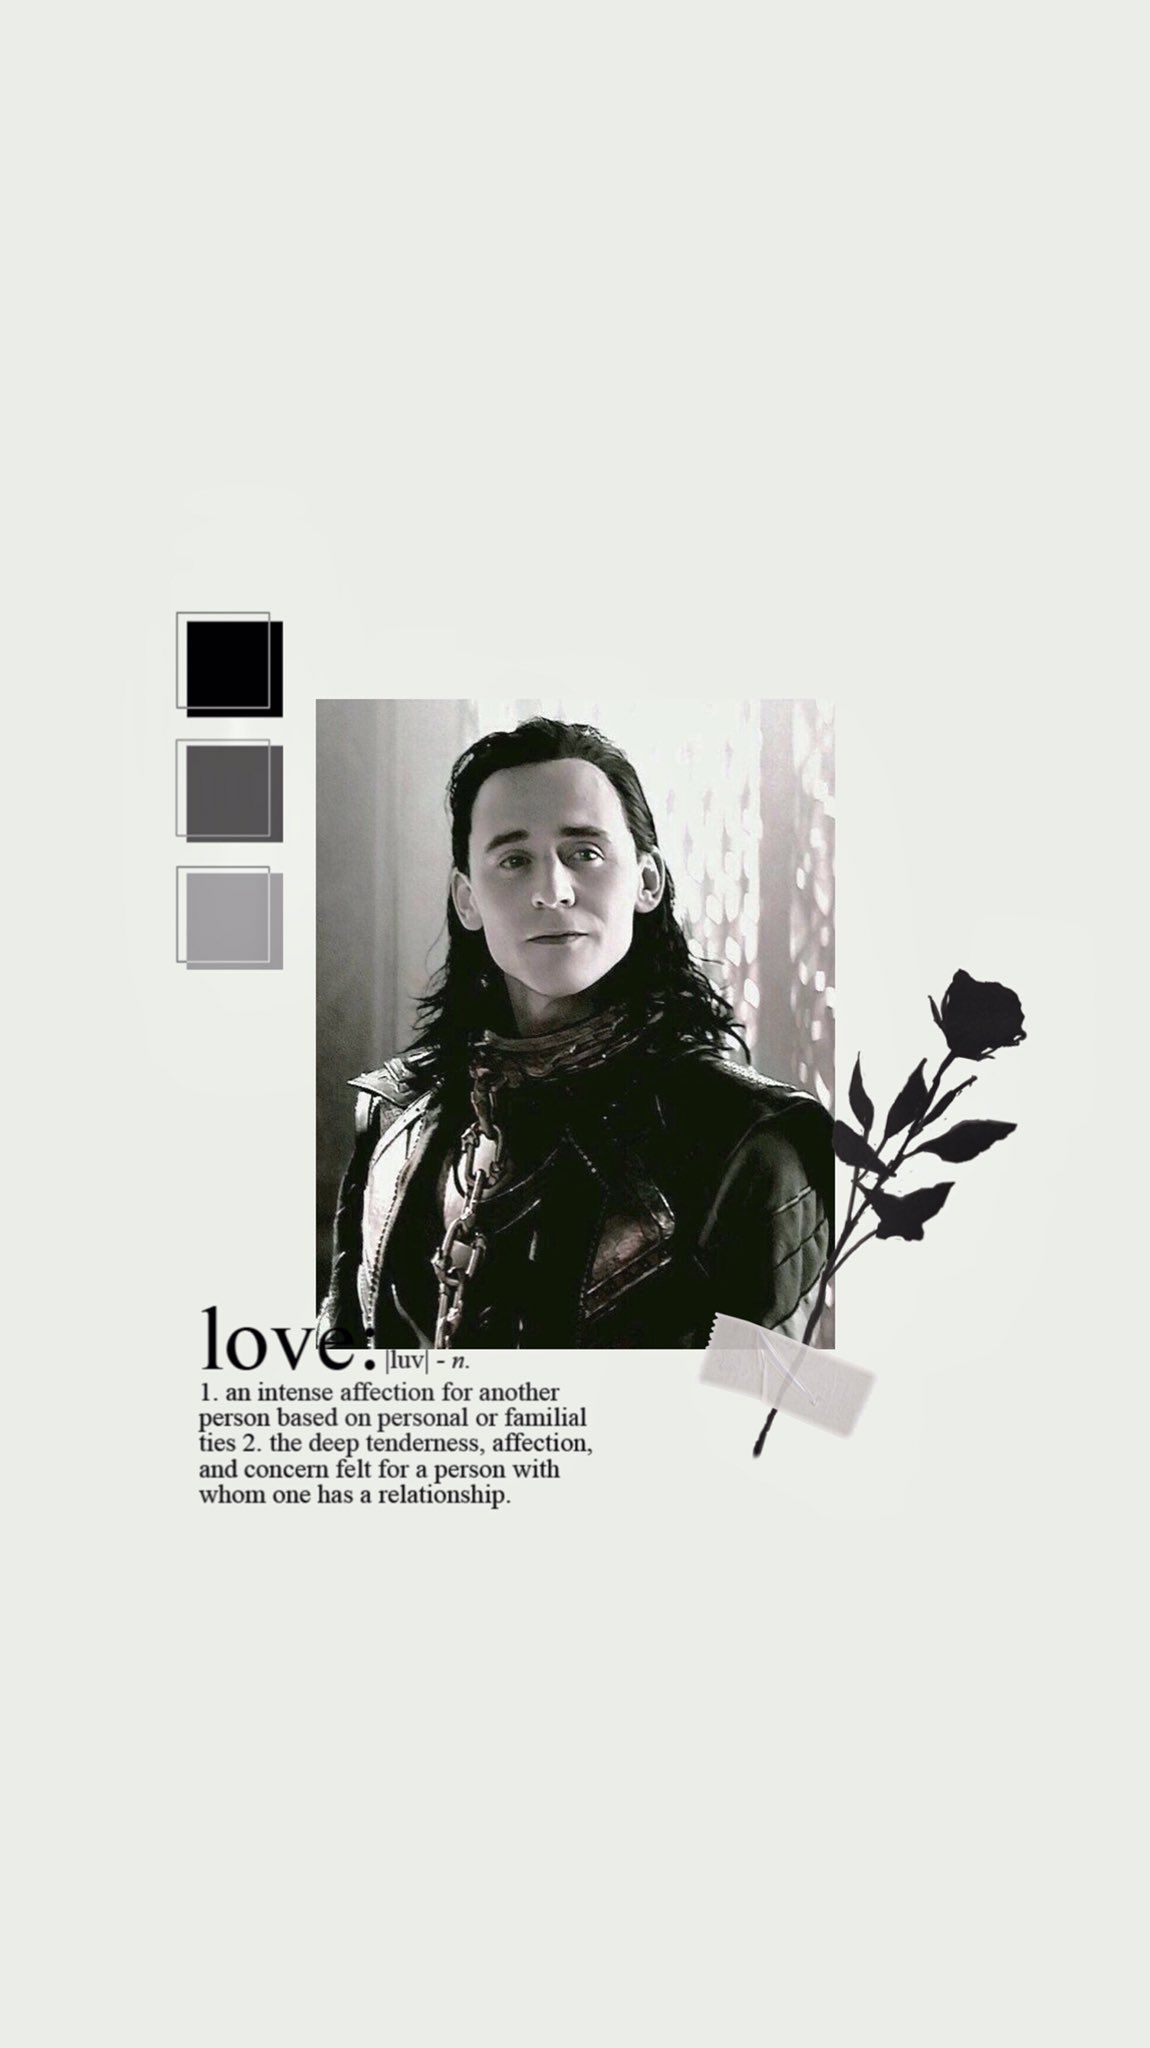 Aesthetic background with Tom Hiddleston as Loki from the Marvel Cinematic Universe - Loki